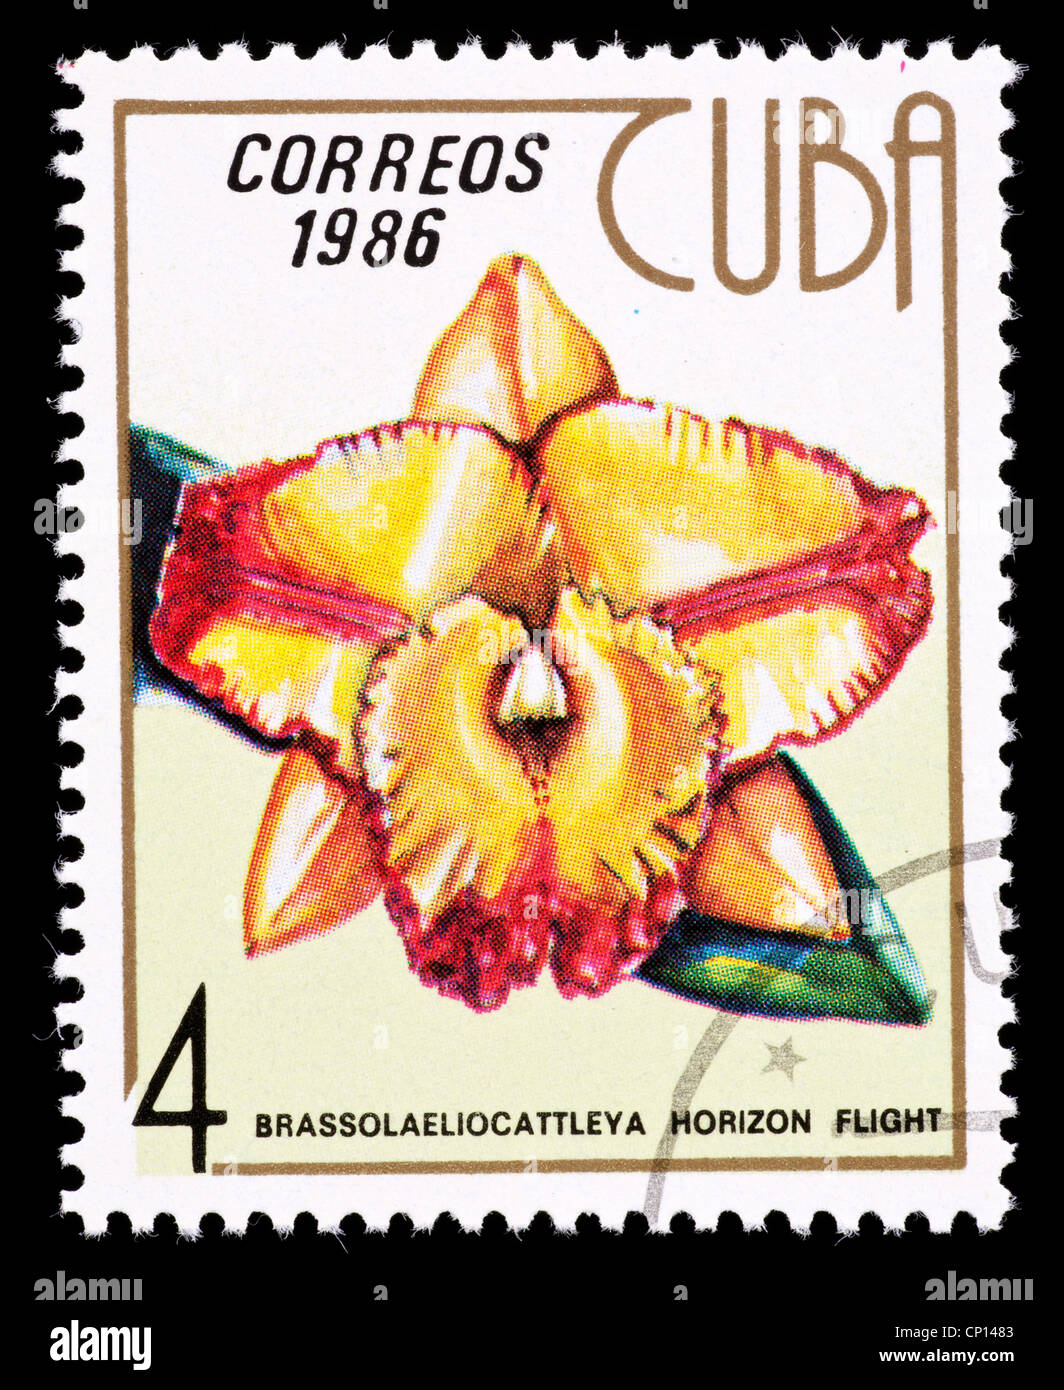 Postage stamp from Cuba depicting an orchid hybrid, Brassolaelio x Cattleya Stock Photo